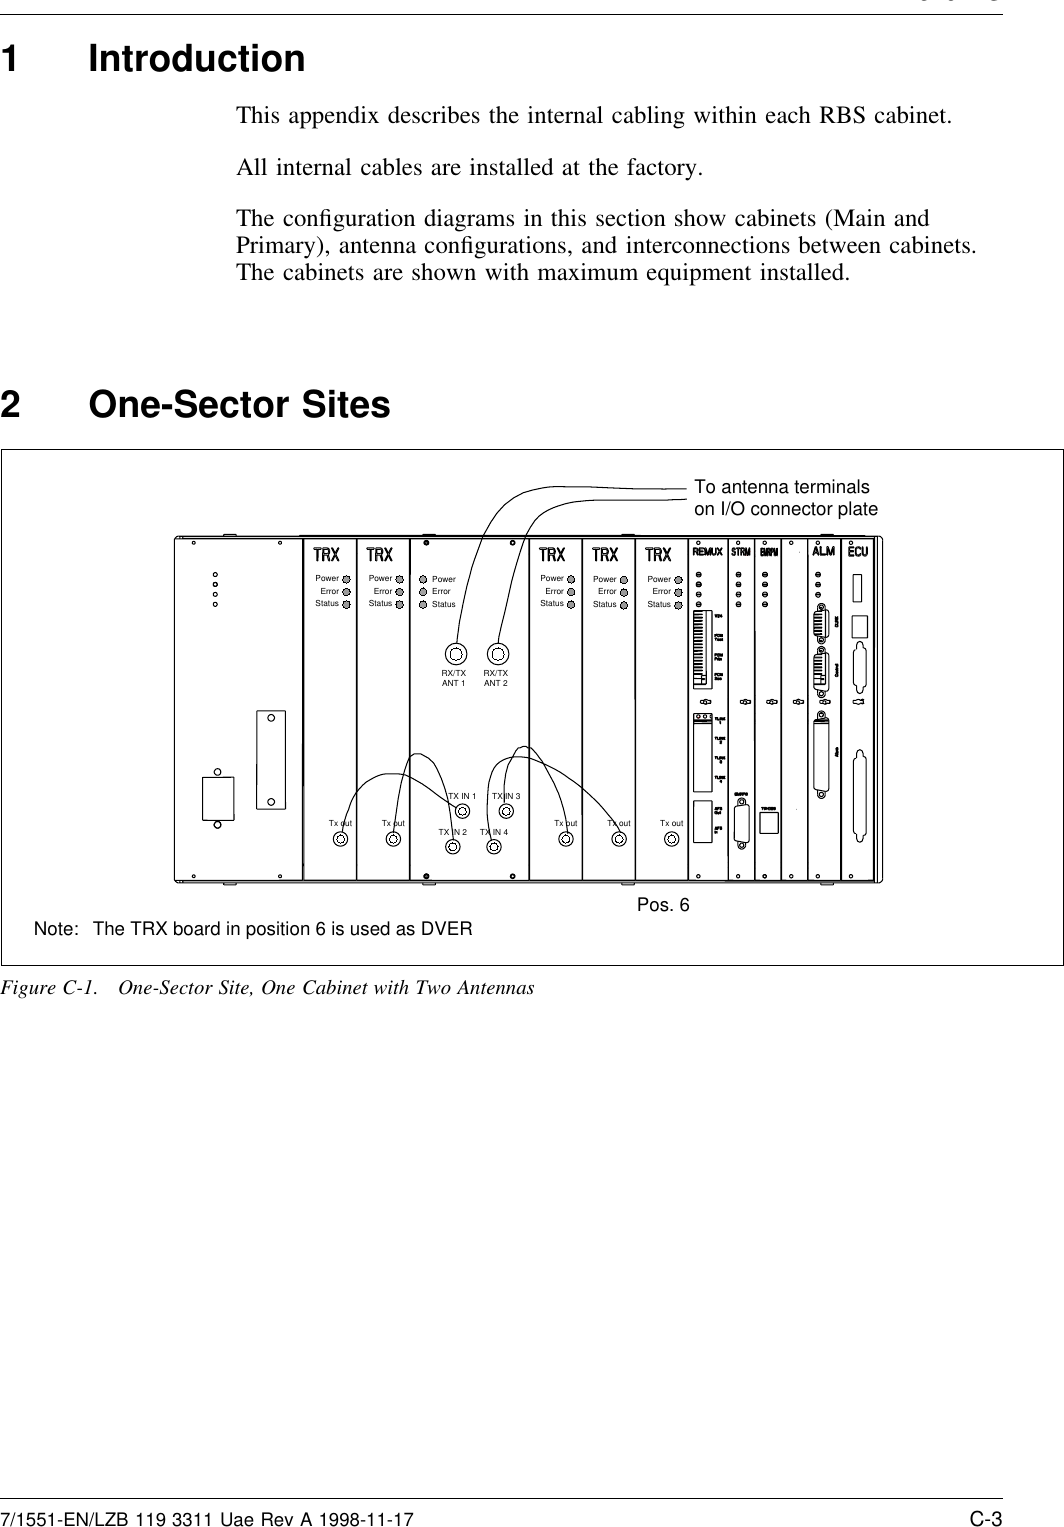 A endix C1 IntroductionThis appendix describes the internal cabling within each RBS cabinet.All internal cables are installed at the factory.The conﬁguration diagrams in this section show cabinets (Main andPrimary), antenna conﬁgurations, and interconnections between cabinets.The cabinets are shown with maximum equipment installed.2 One-Sector SitesPowerErrorStatusRX/TXANT 1 RX/TXANT 2TX IN 1TX IN 2TX IN 3TX IN 4PowerErrorStatusPowerErrorStatusPowerErrorStatusPowerErrorStatusPowerErrorStatusTx out Tx out Tx out Tx out Tx outTo antenna terminalson I/O connector plate Note: The TRX board in position 6 is used as DVERPos. 6Figure C-1. One-Sector Site, One Cabinet with Two Antennas7/1551-EN/LZB 119 3311 Uae Rev A 1998-11-17 C-3